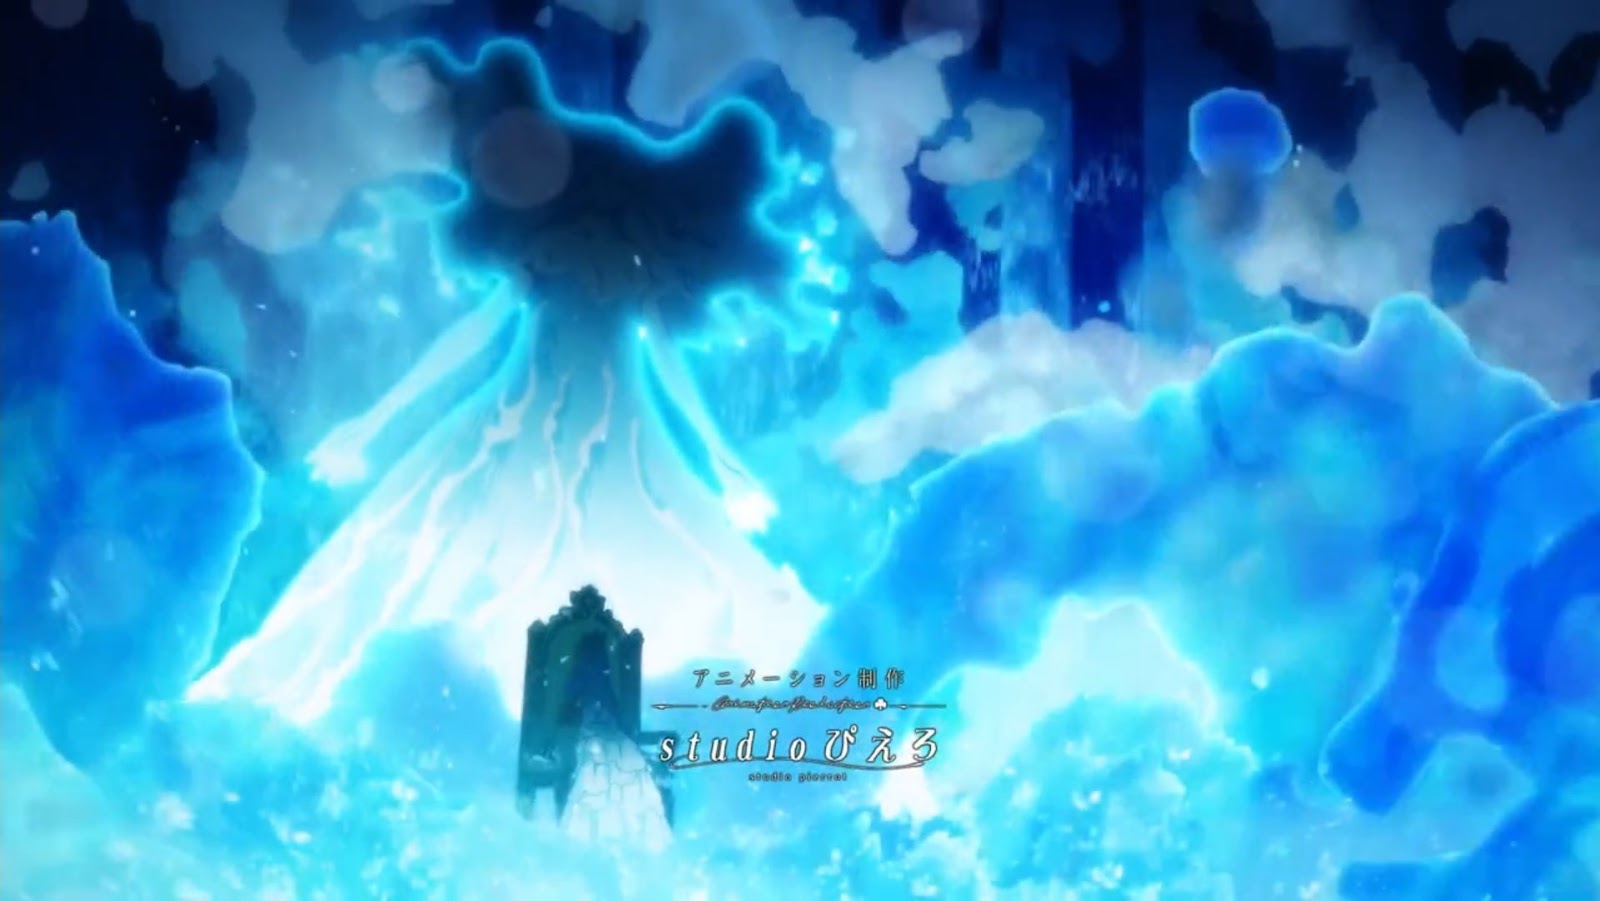 Black Clover Episode 125,126,127,128,129 Release Date, Titles, Synopsis, St...